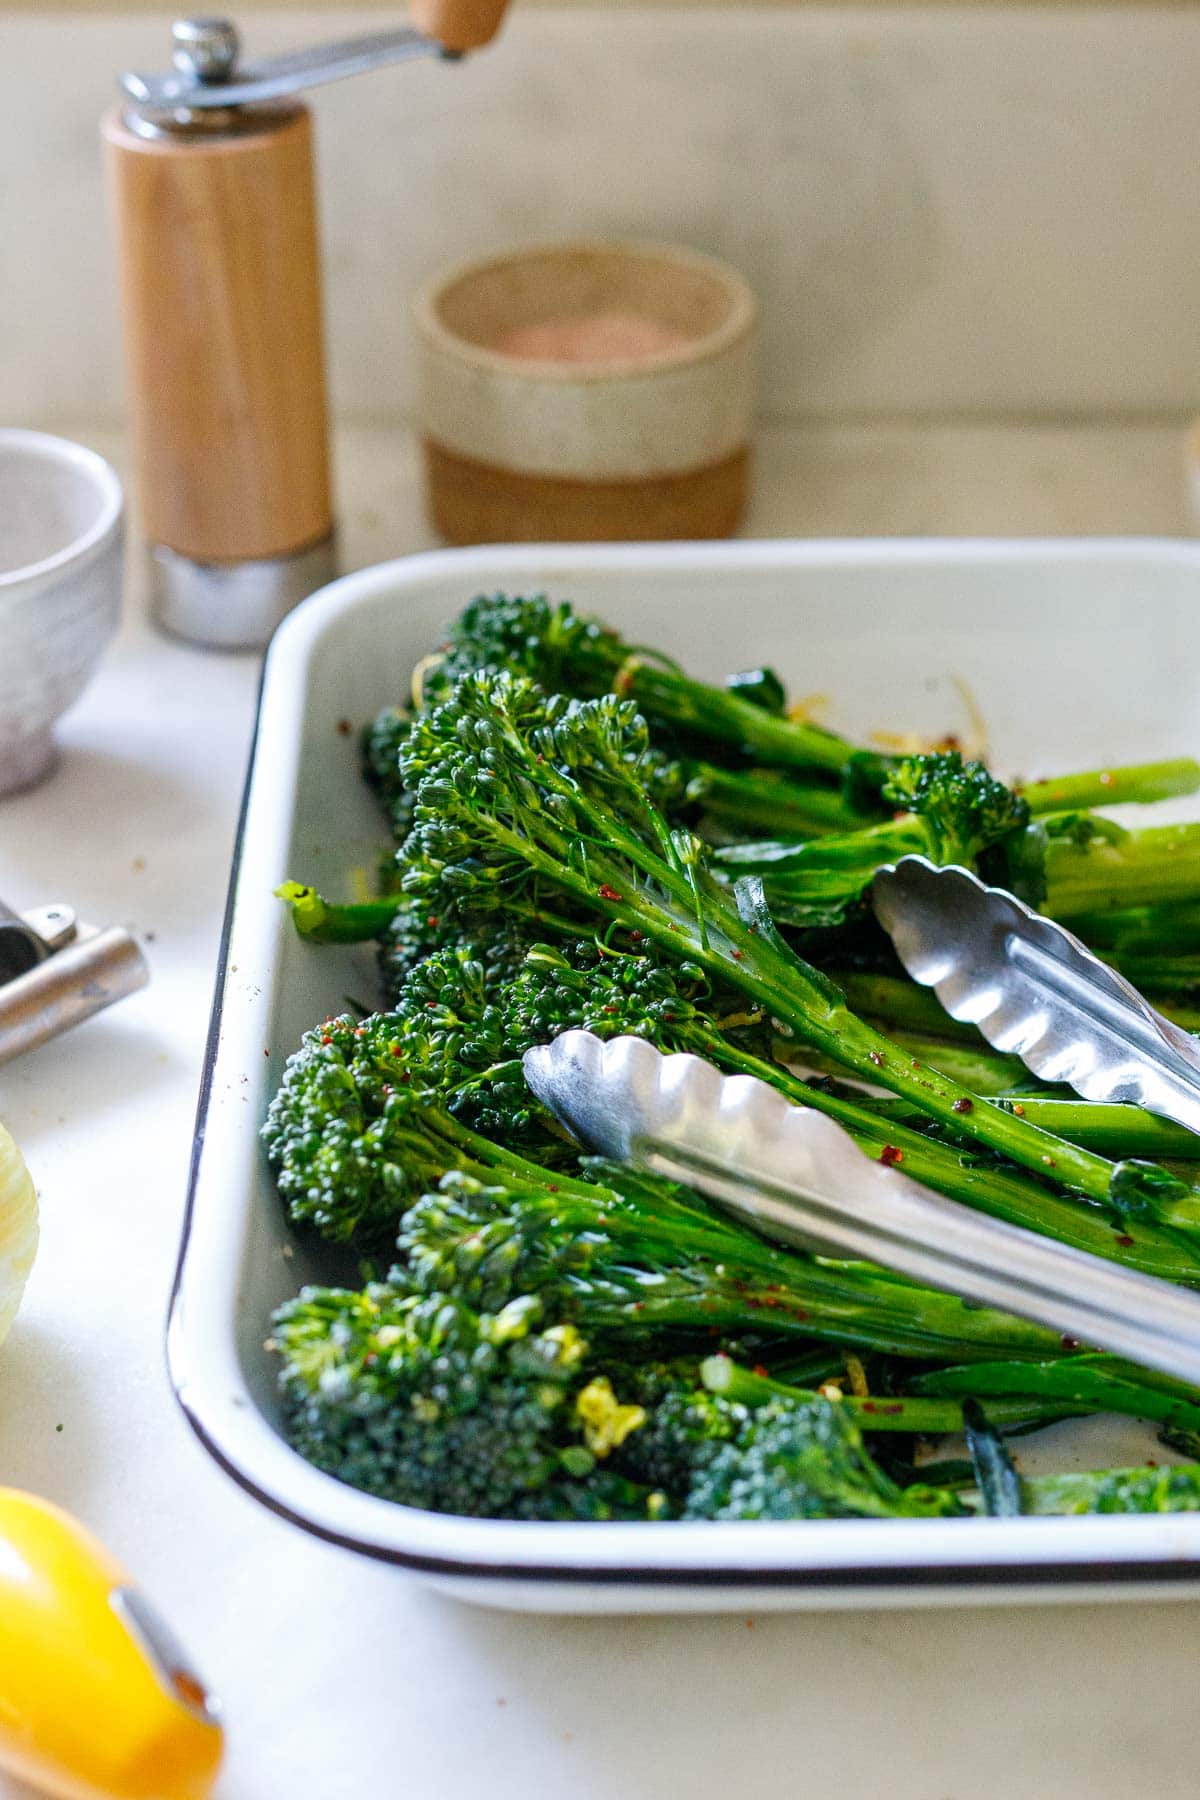 Toss the broccolini in the marinade. 